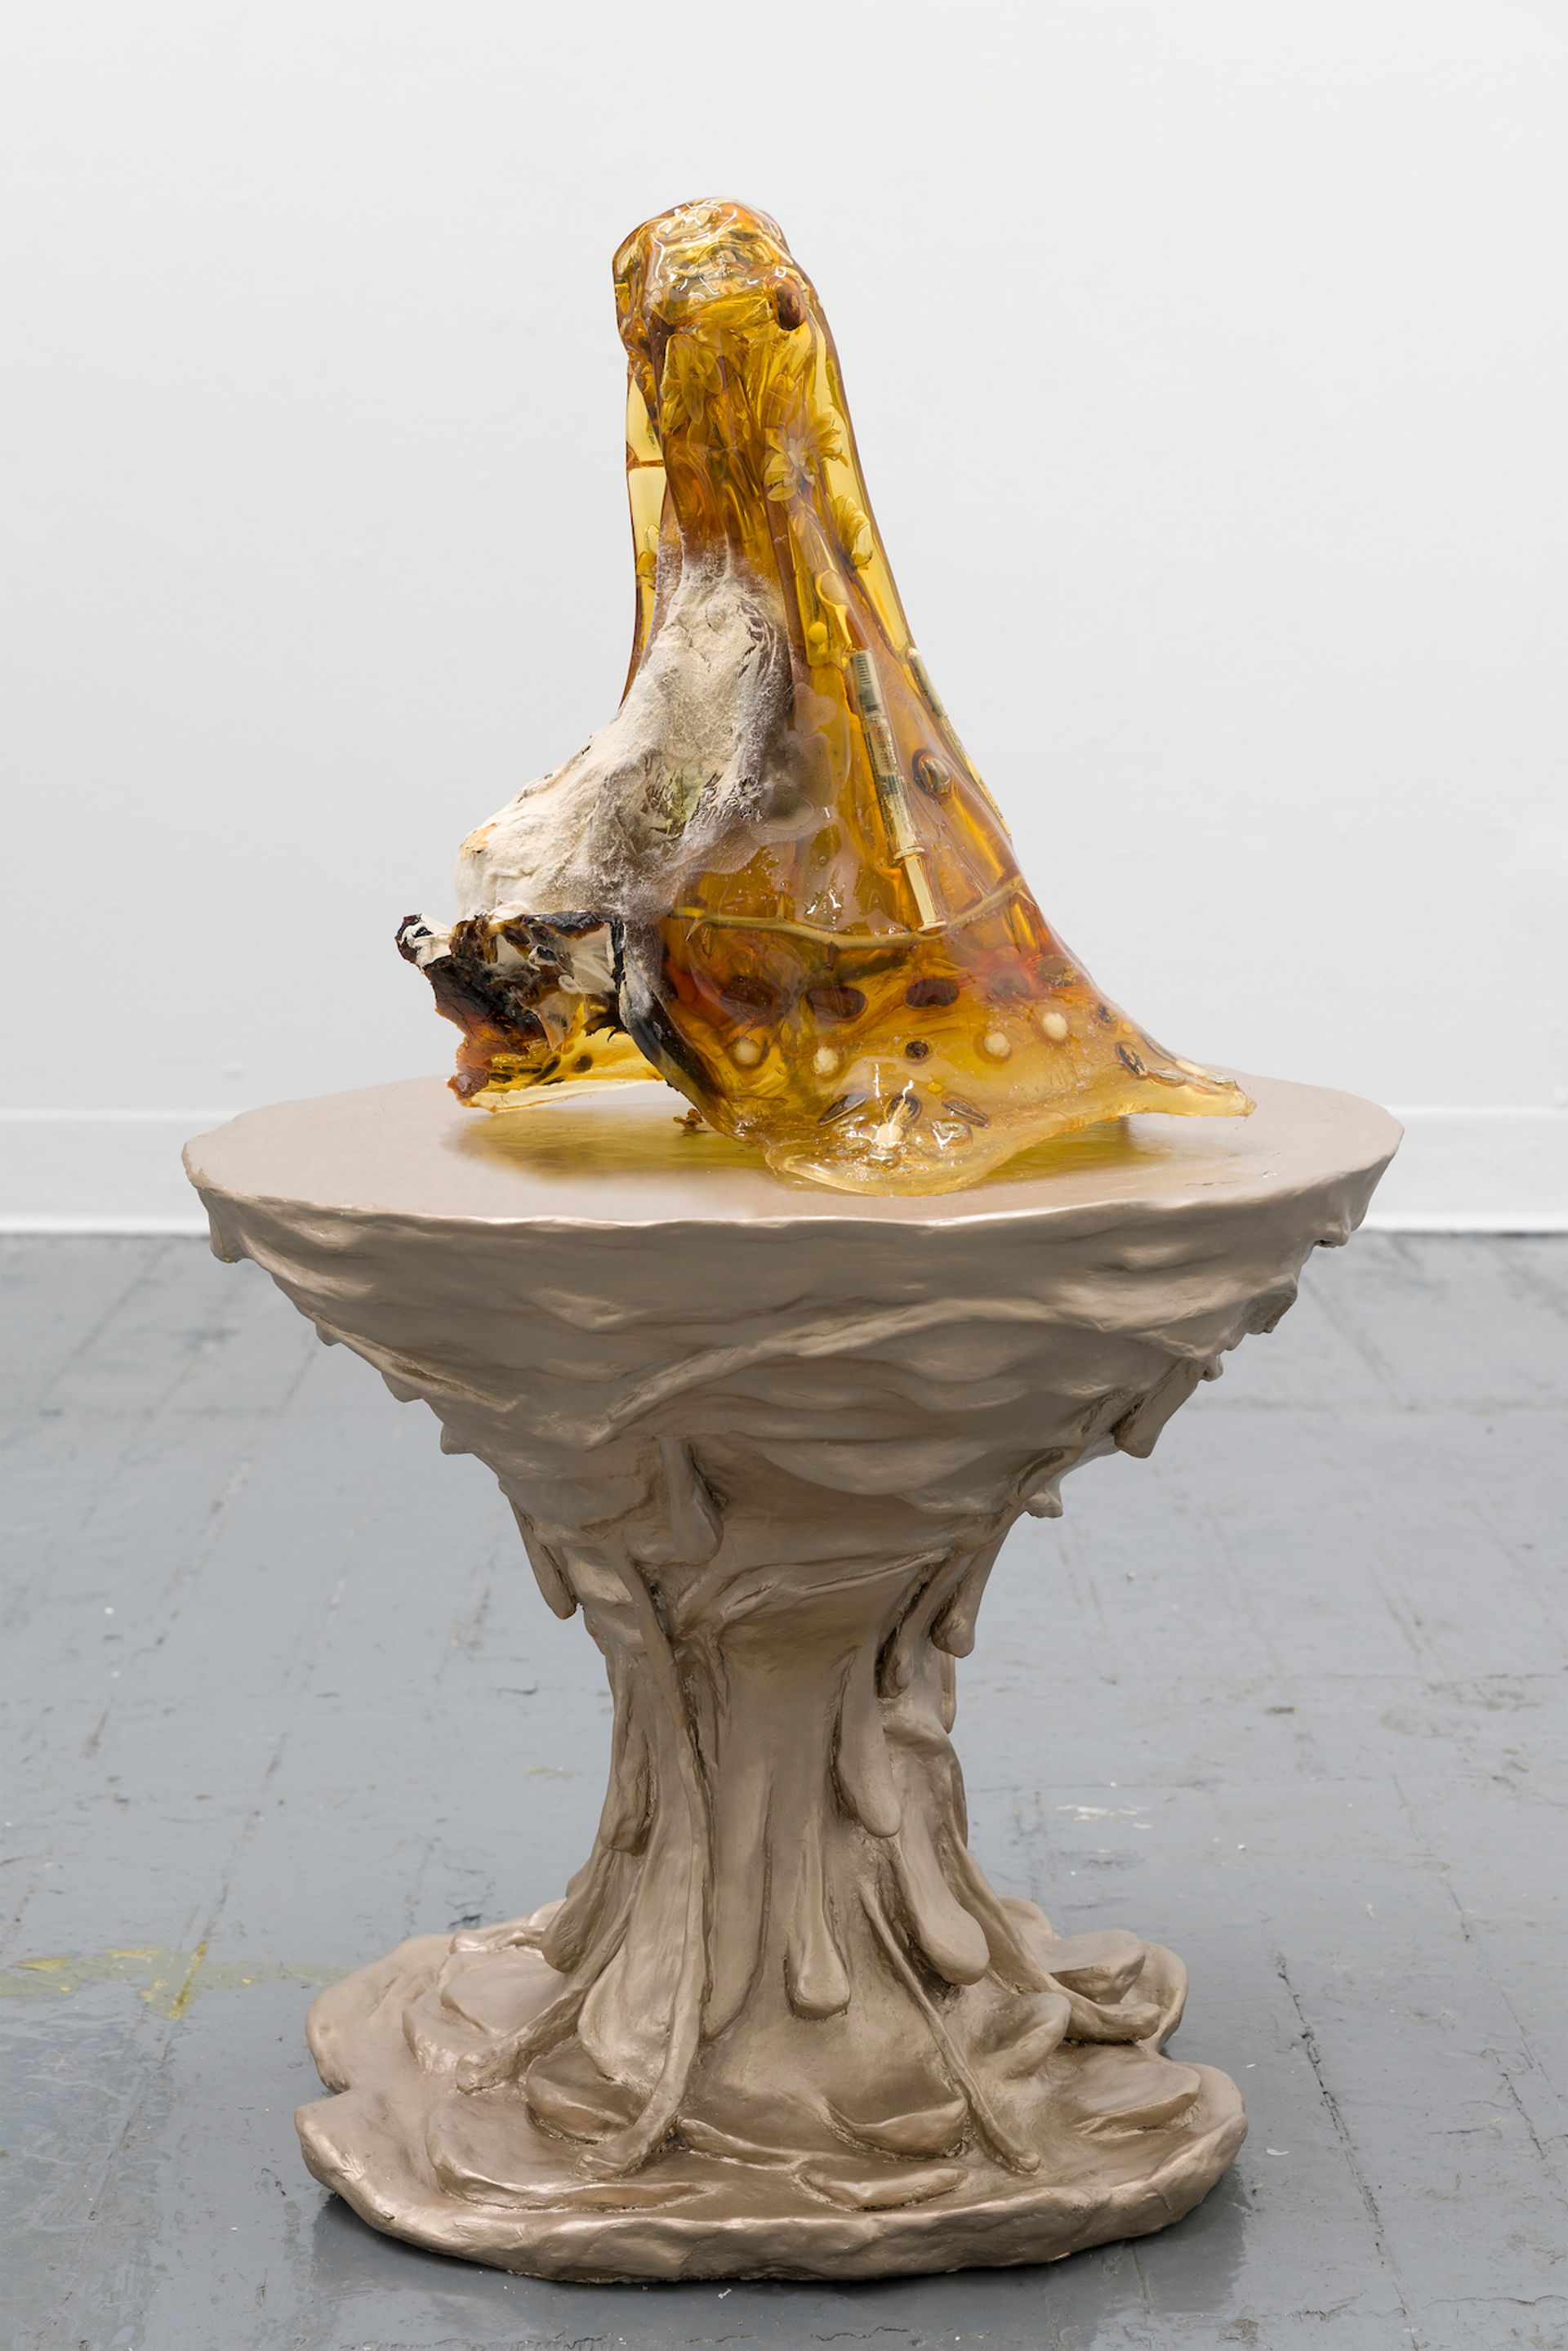 Sharona Franklin’s Mycoplasma Altar (2020) after decomposing for six months Courtesy the artist and King’s Leap. Photo: Stephen Faught